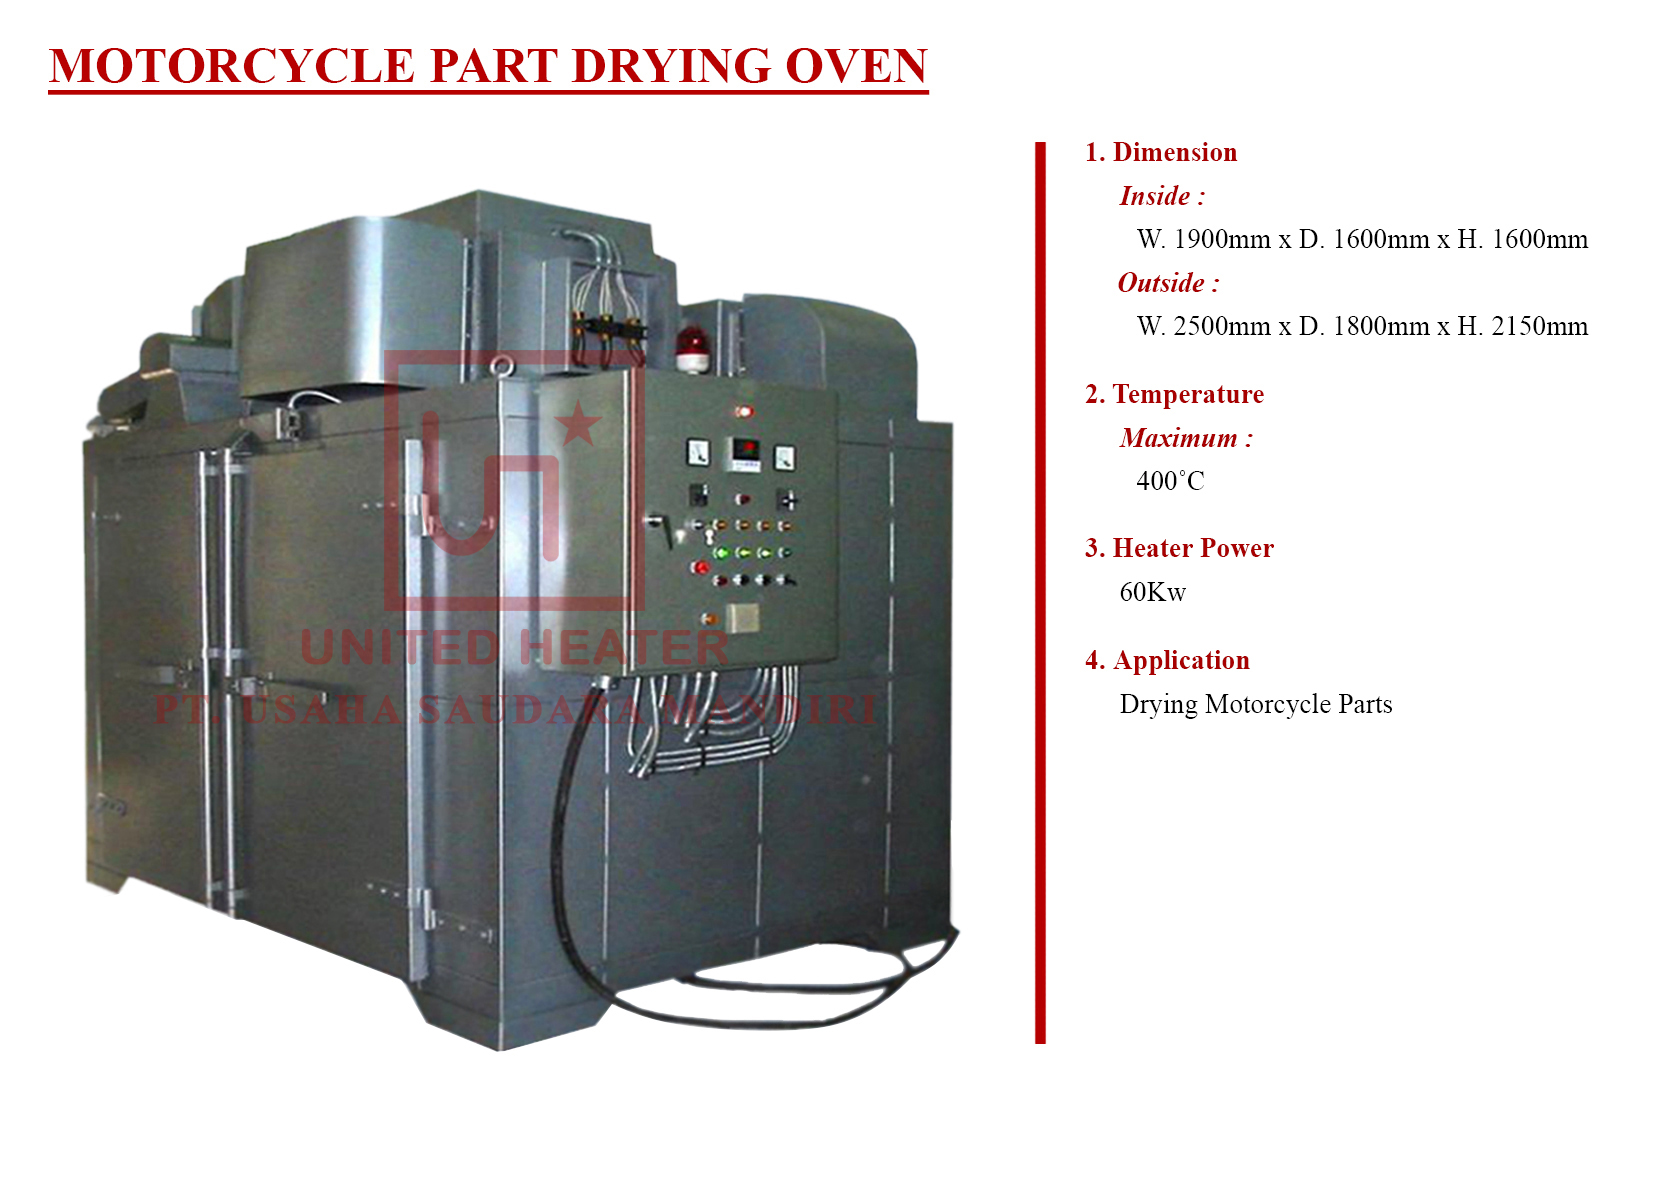 MOTORCYCLE PART DRYING OVEN